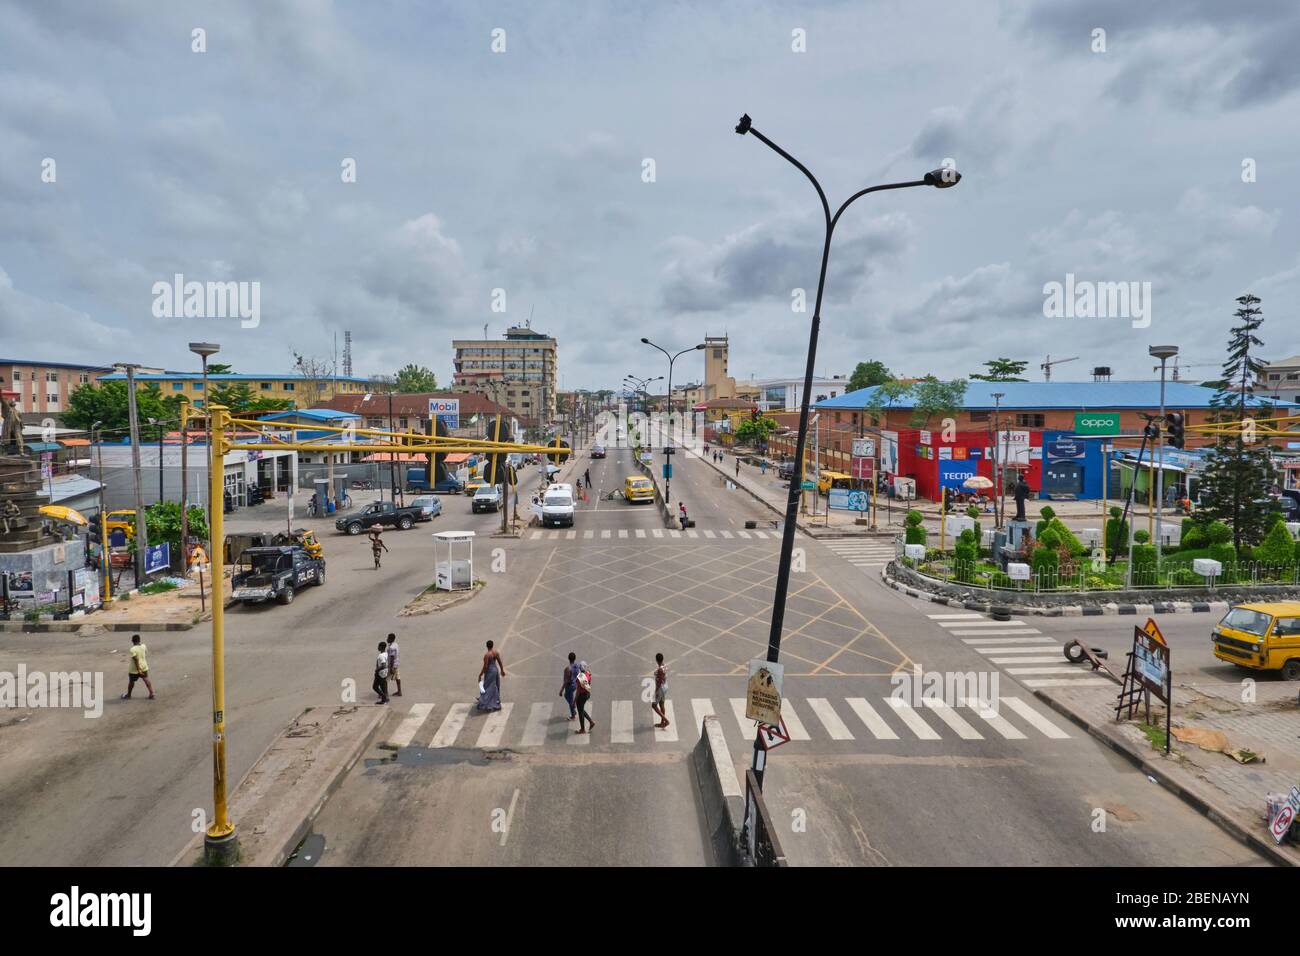 A view of Sabo bus stop, Herbert Macauley Way, Lagos, Nigeria on the 3rd day of a Covid-19 lockdown of businesses and vehicular movement. Stock Photo